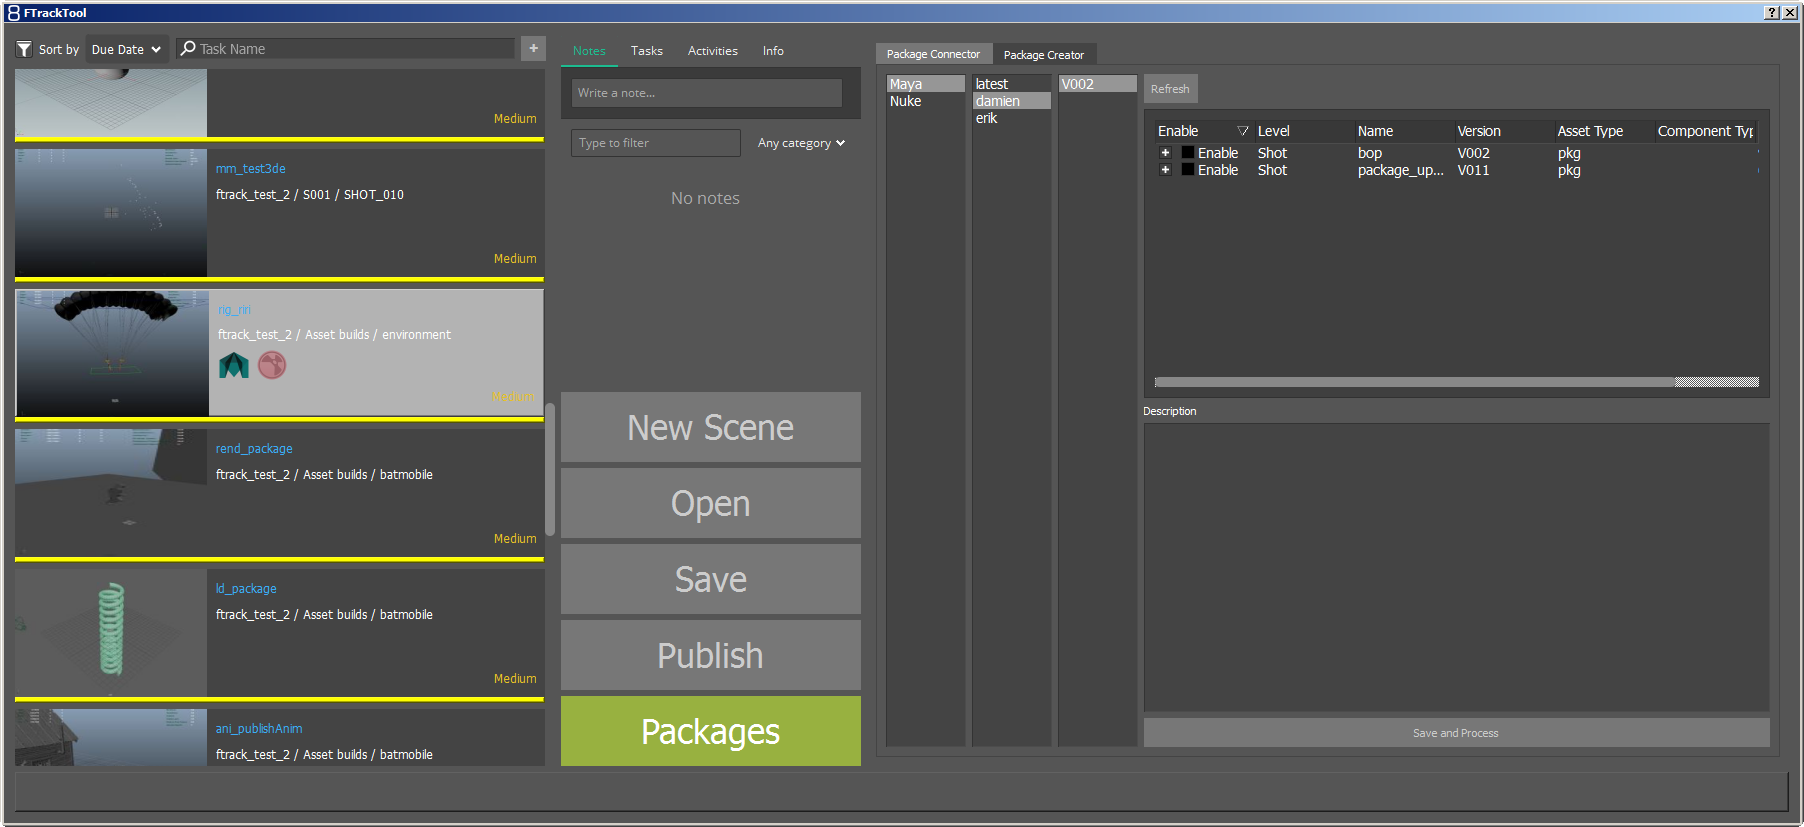 The Eight VFX Tool One UI for all ftrack